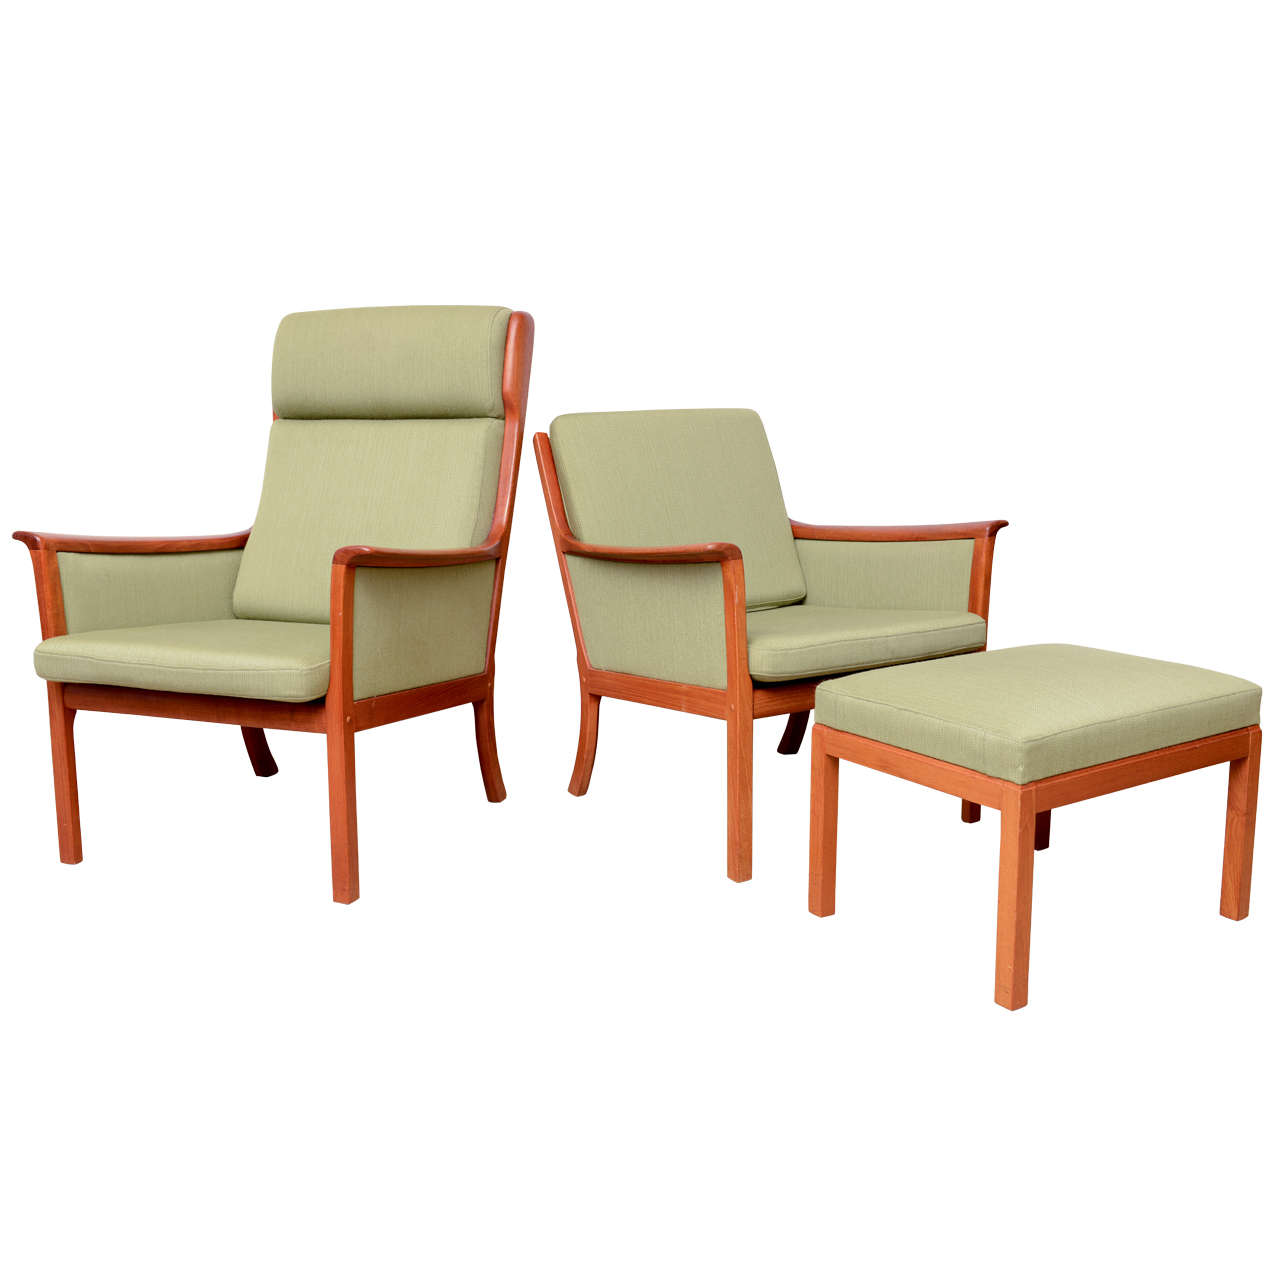 Pair of Danish Armchairs with Foot Stool in Teak by Ole Wanscher